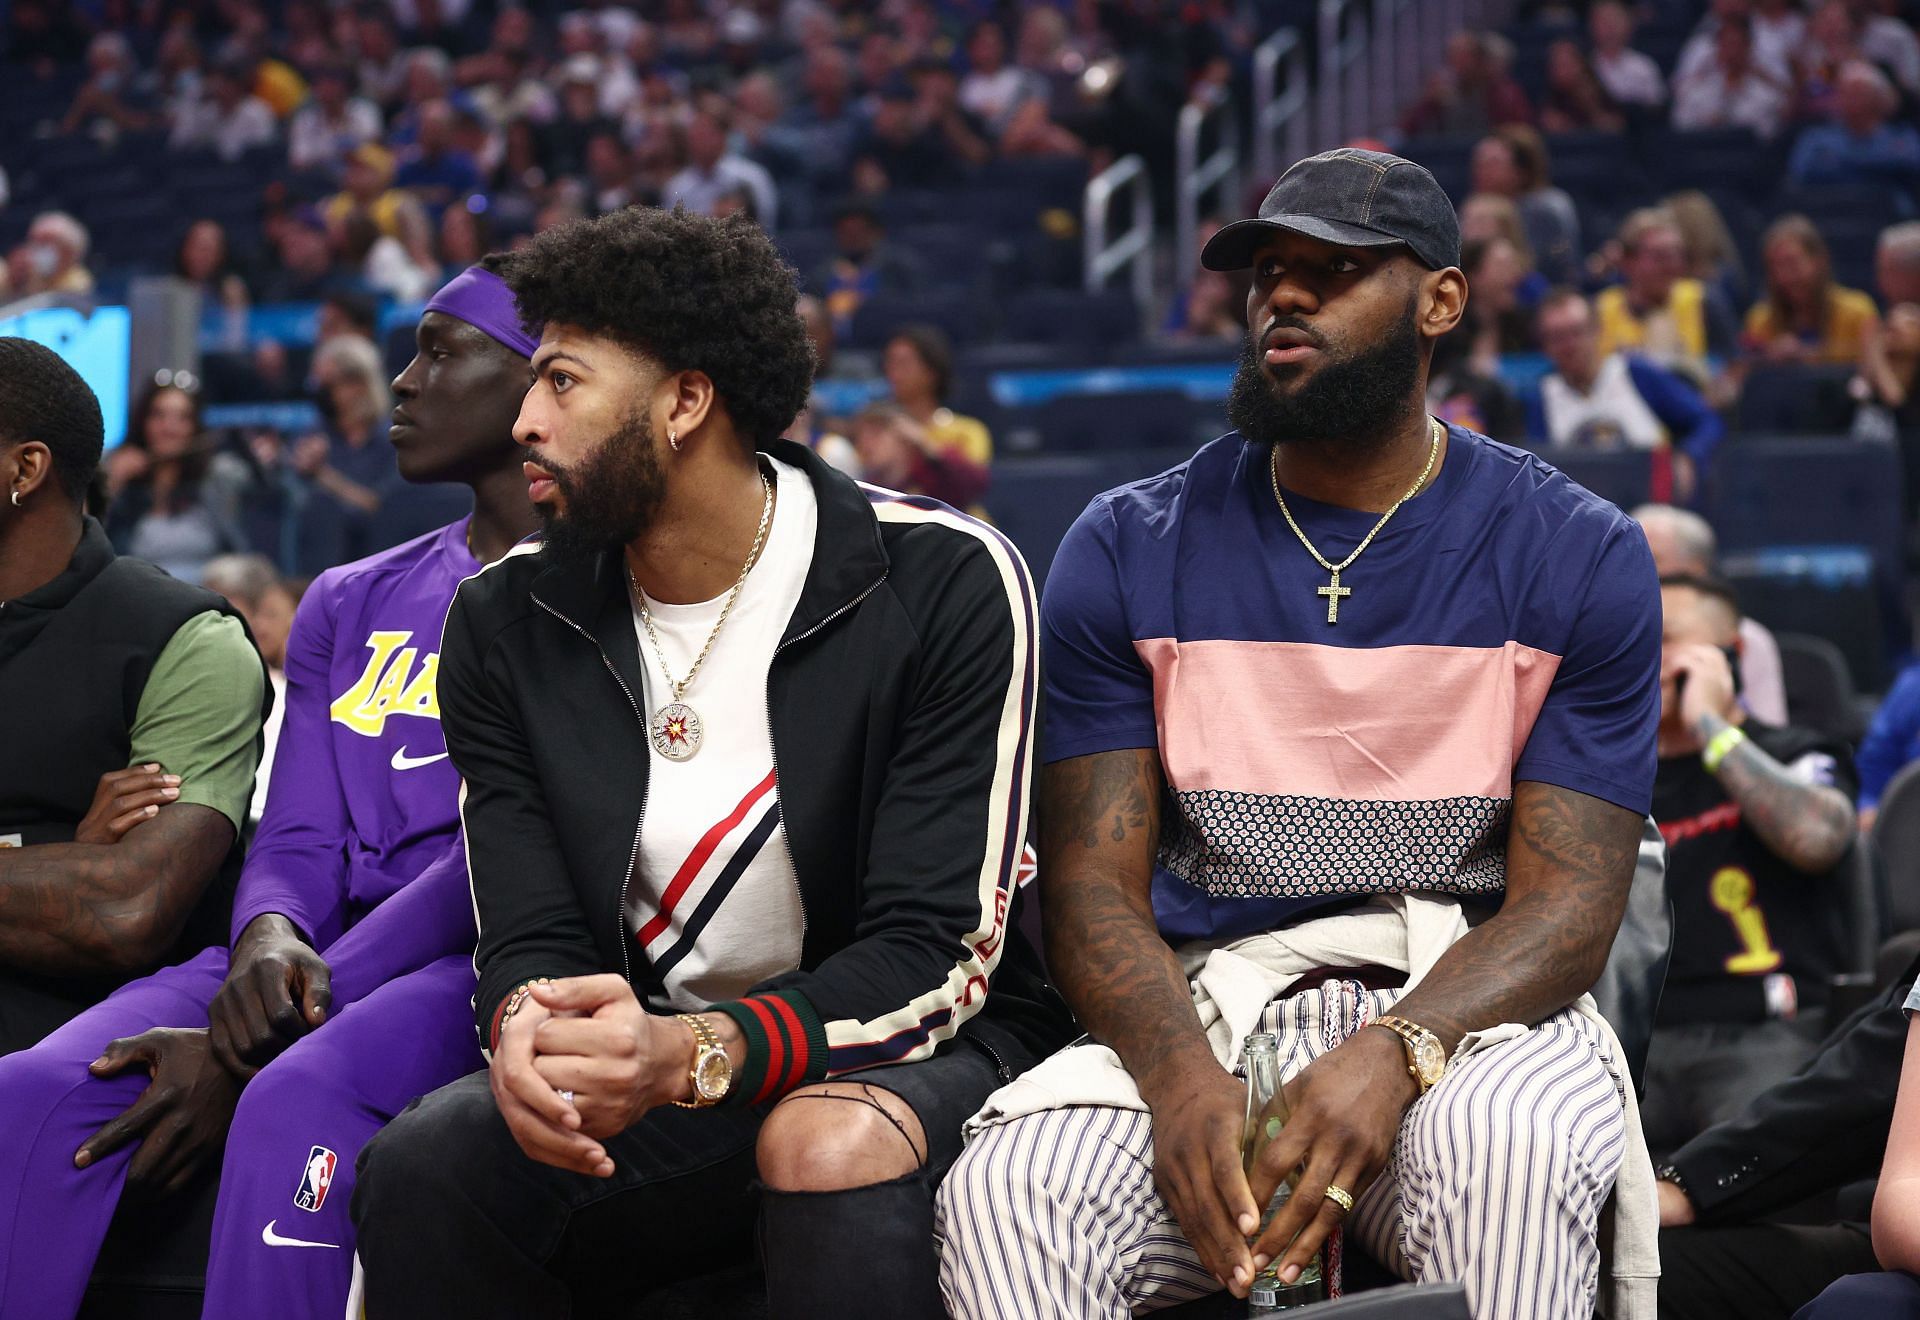 LeBron James looks on at the game with Anthony Davis